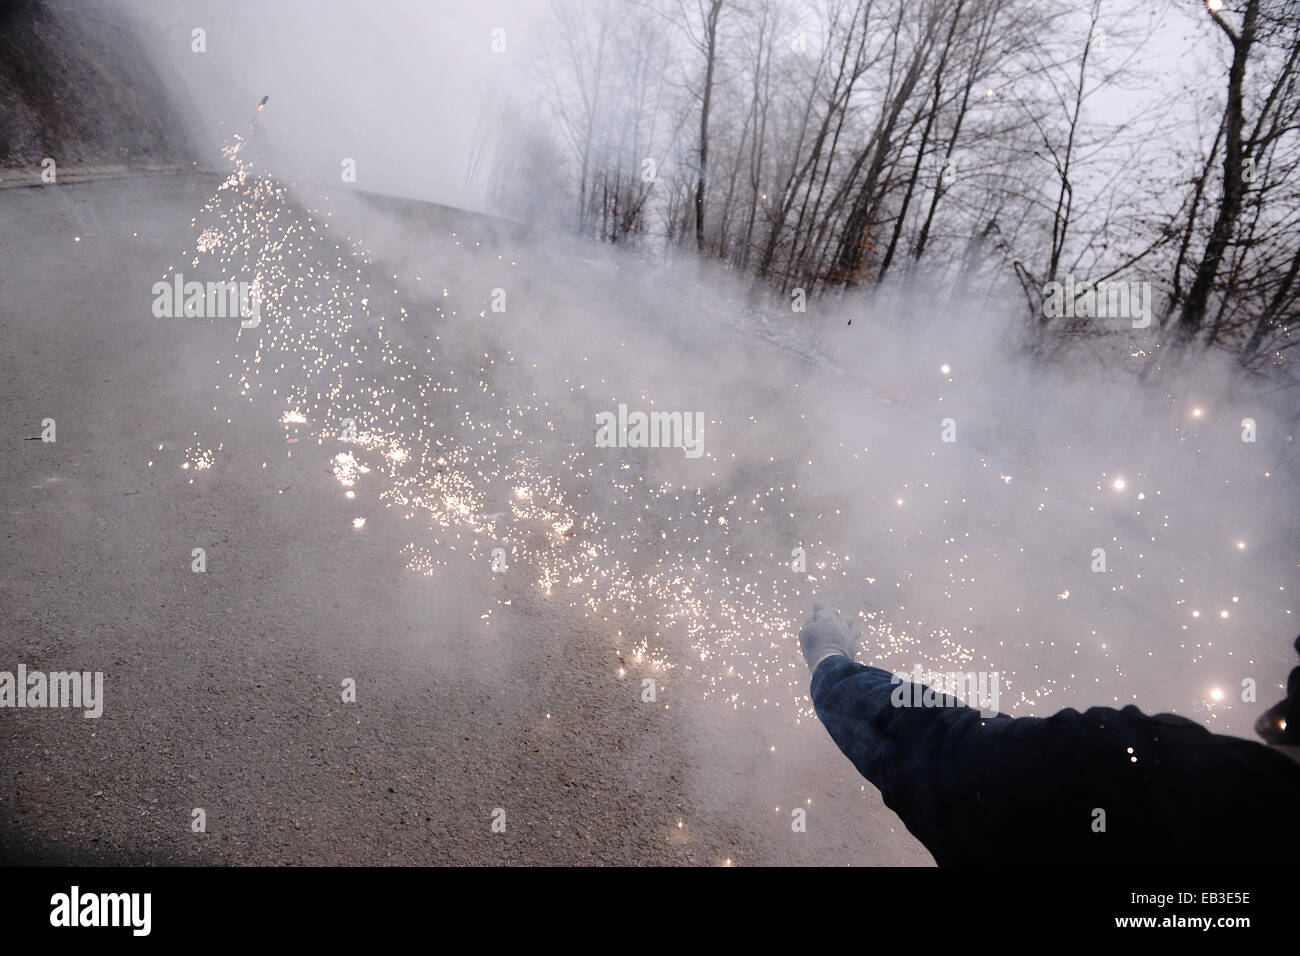 Residents of Chalkidiki's villages, clash with police during a demonstration against the operation of gold mines in the nearby area of Skouries. Residents react against a possible environmental disaster caused by the gold mining project. Stock Photo